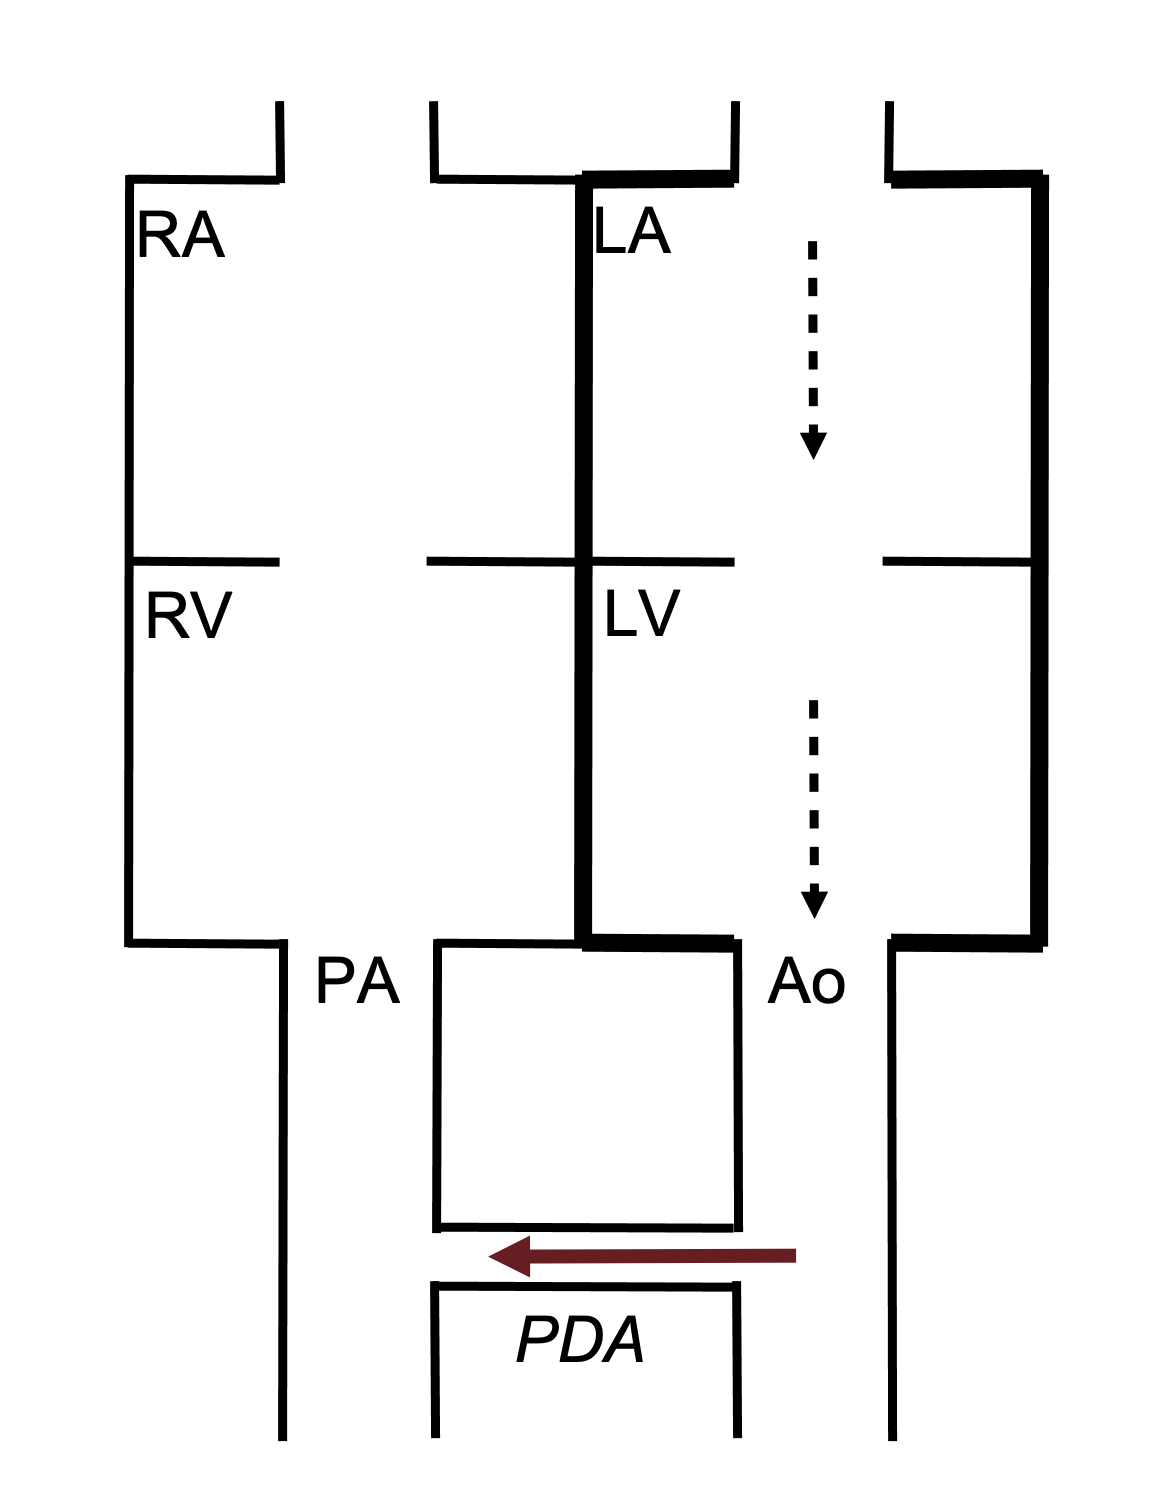 Heart chambers drawn and labeled the same as figure 6.1. Shunt connected Ao and PA labeled PDA with arrow pointing to PA.